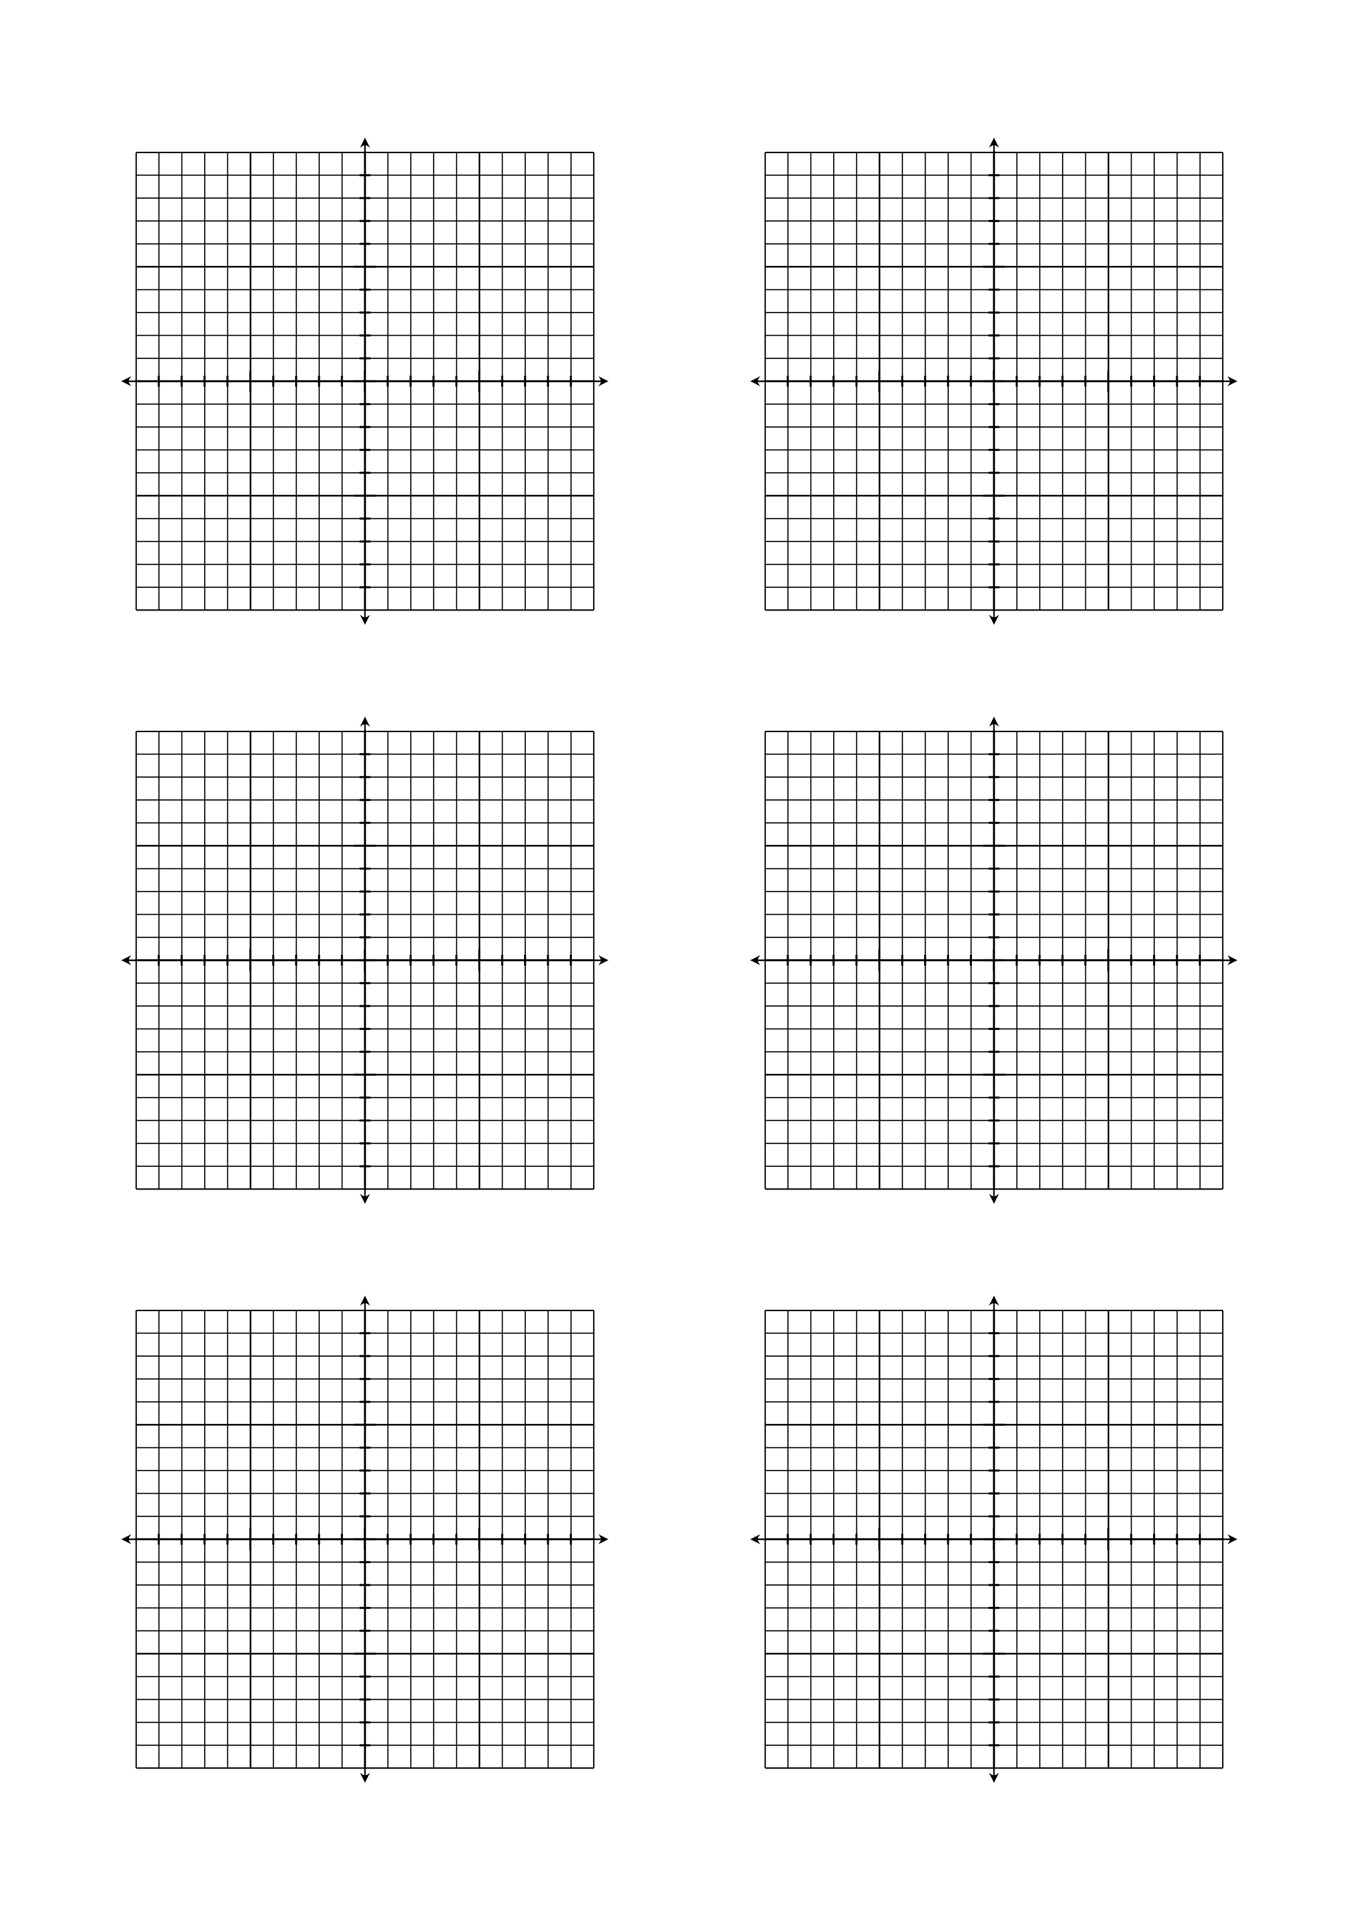 9 Best Images of Free Coordinate Grid Worksheets - Mickey ...